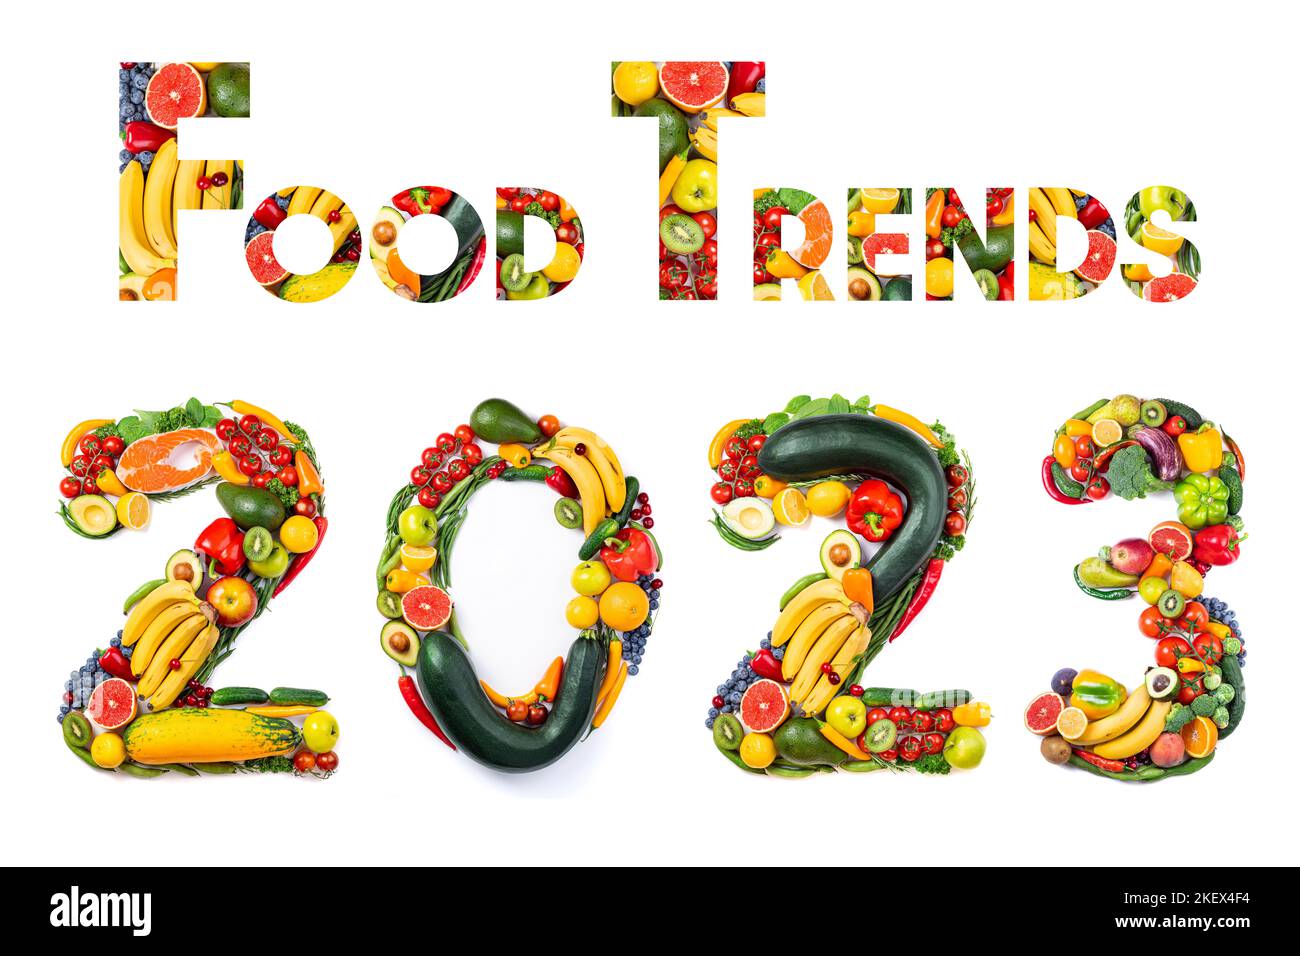 New year 2023 food trends. New Year 2023 made of vegetables, fruits and ...